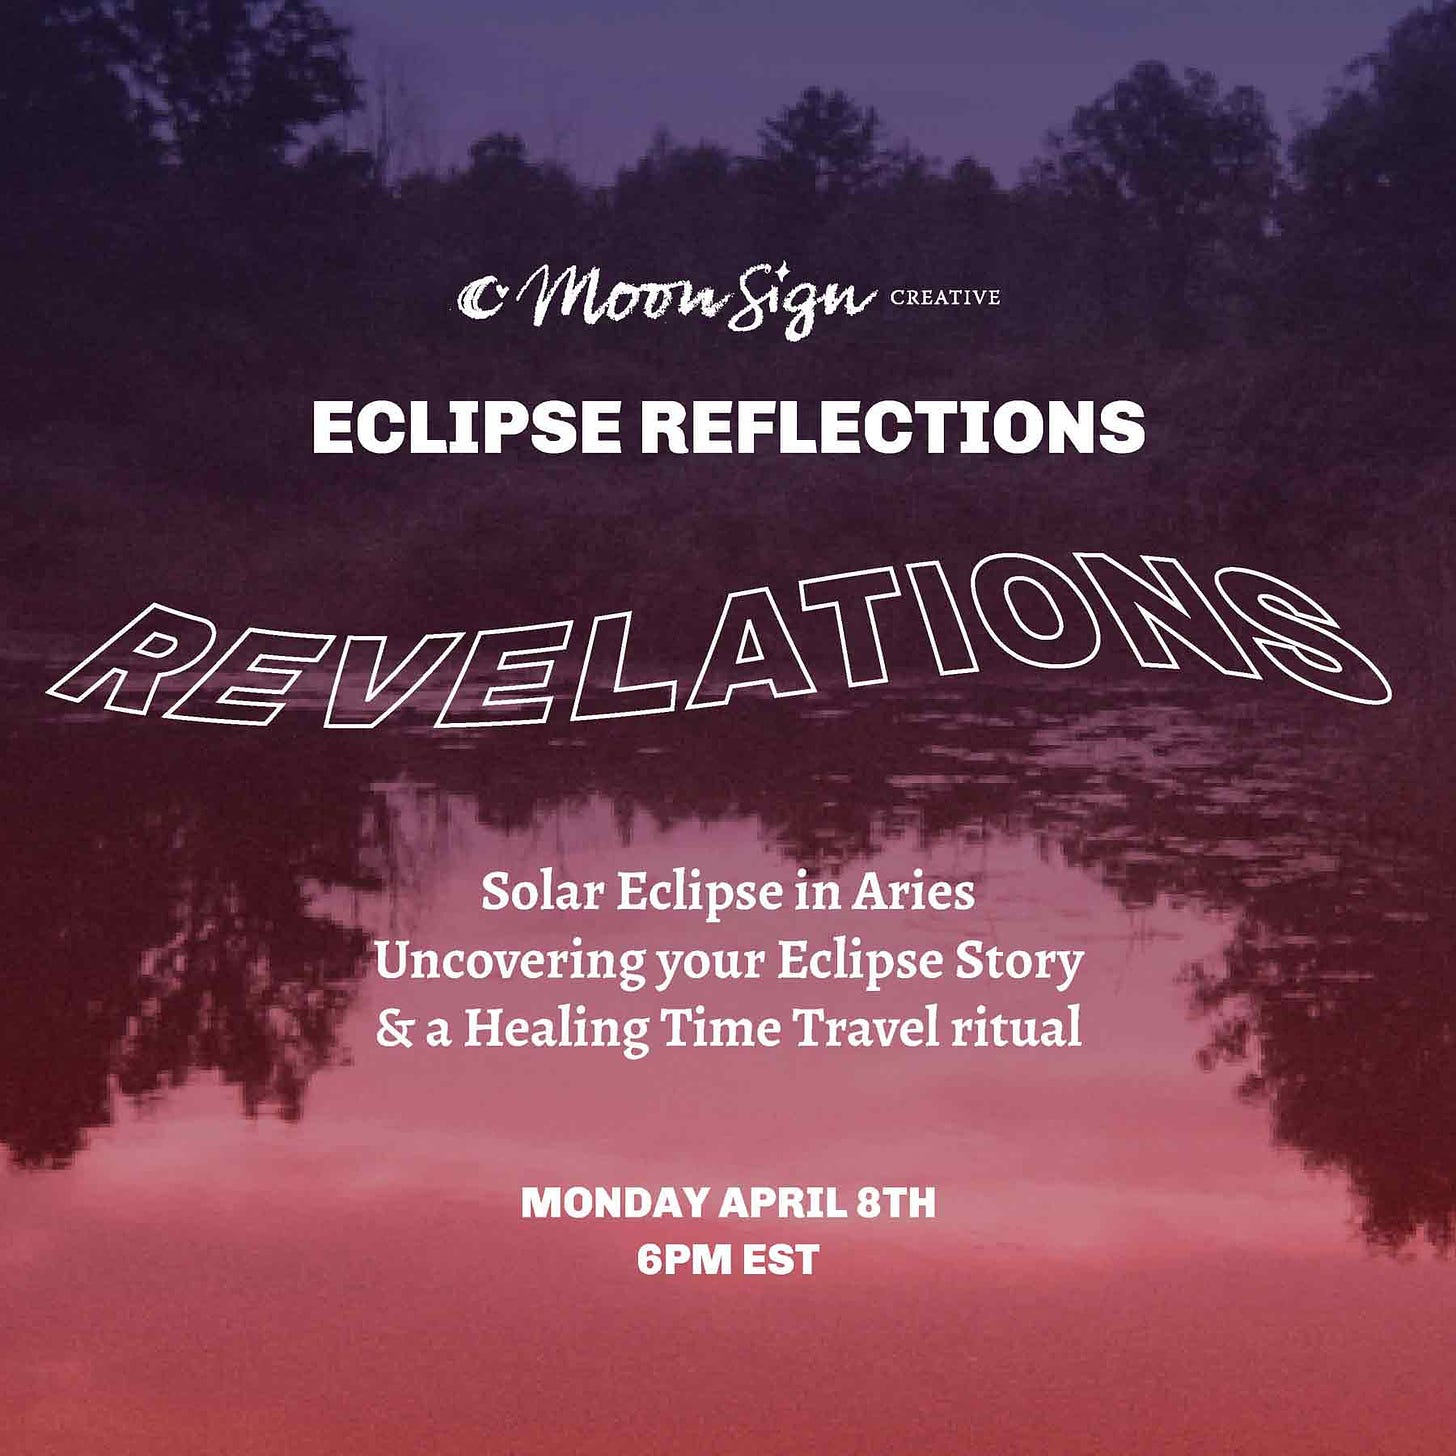 LAST CHANCE!!! DISCOVER YOUR ECLIPSE STORY WITH US 6PM EST TONIGHT! 🌚🌞